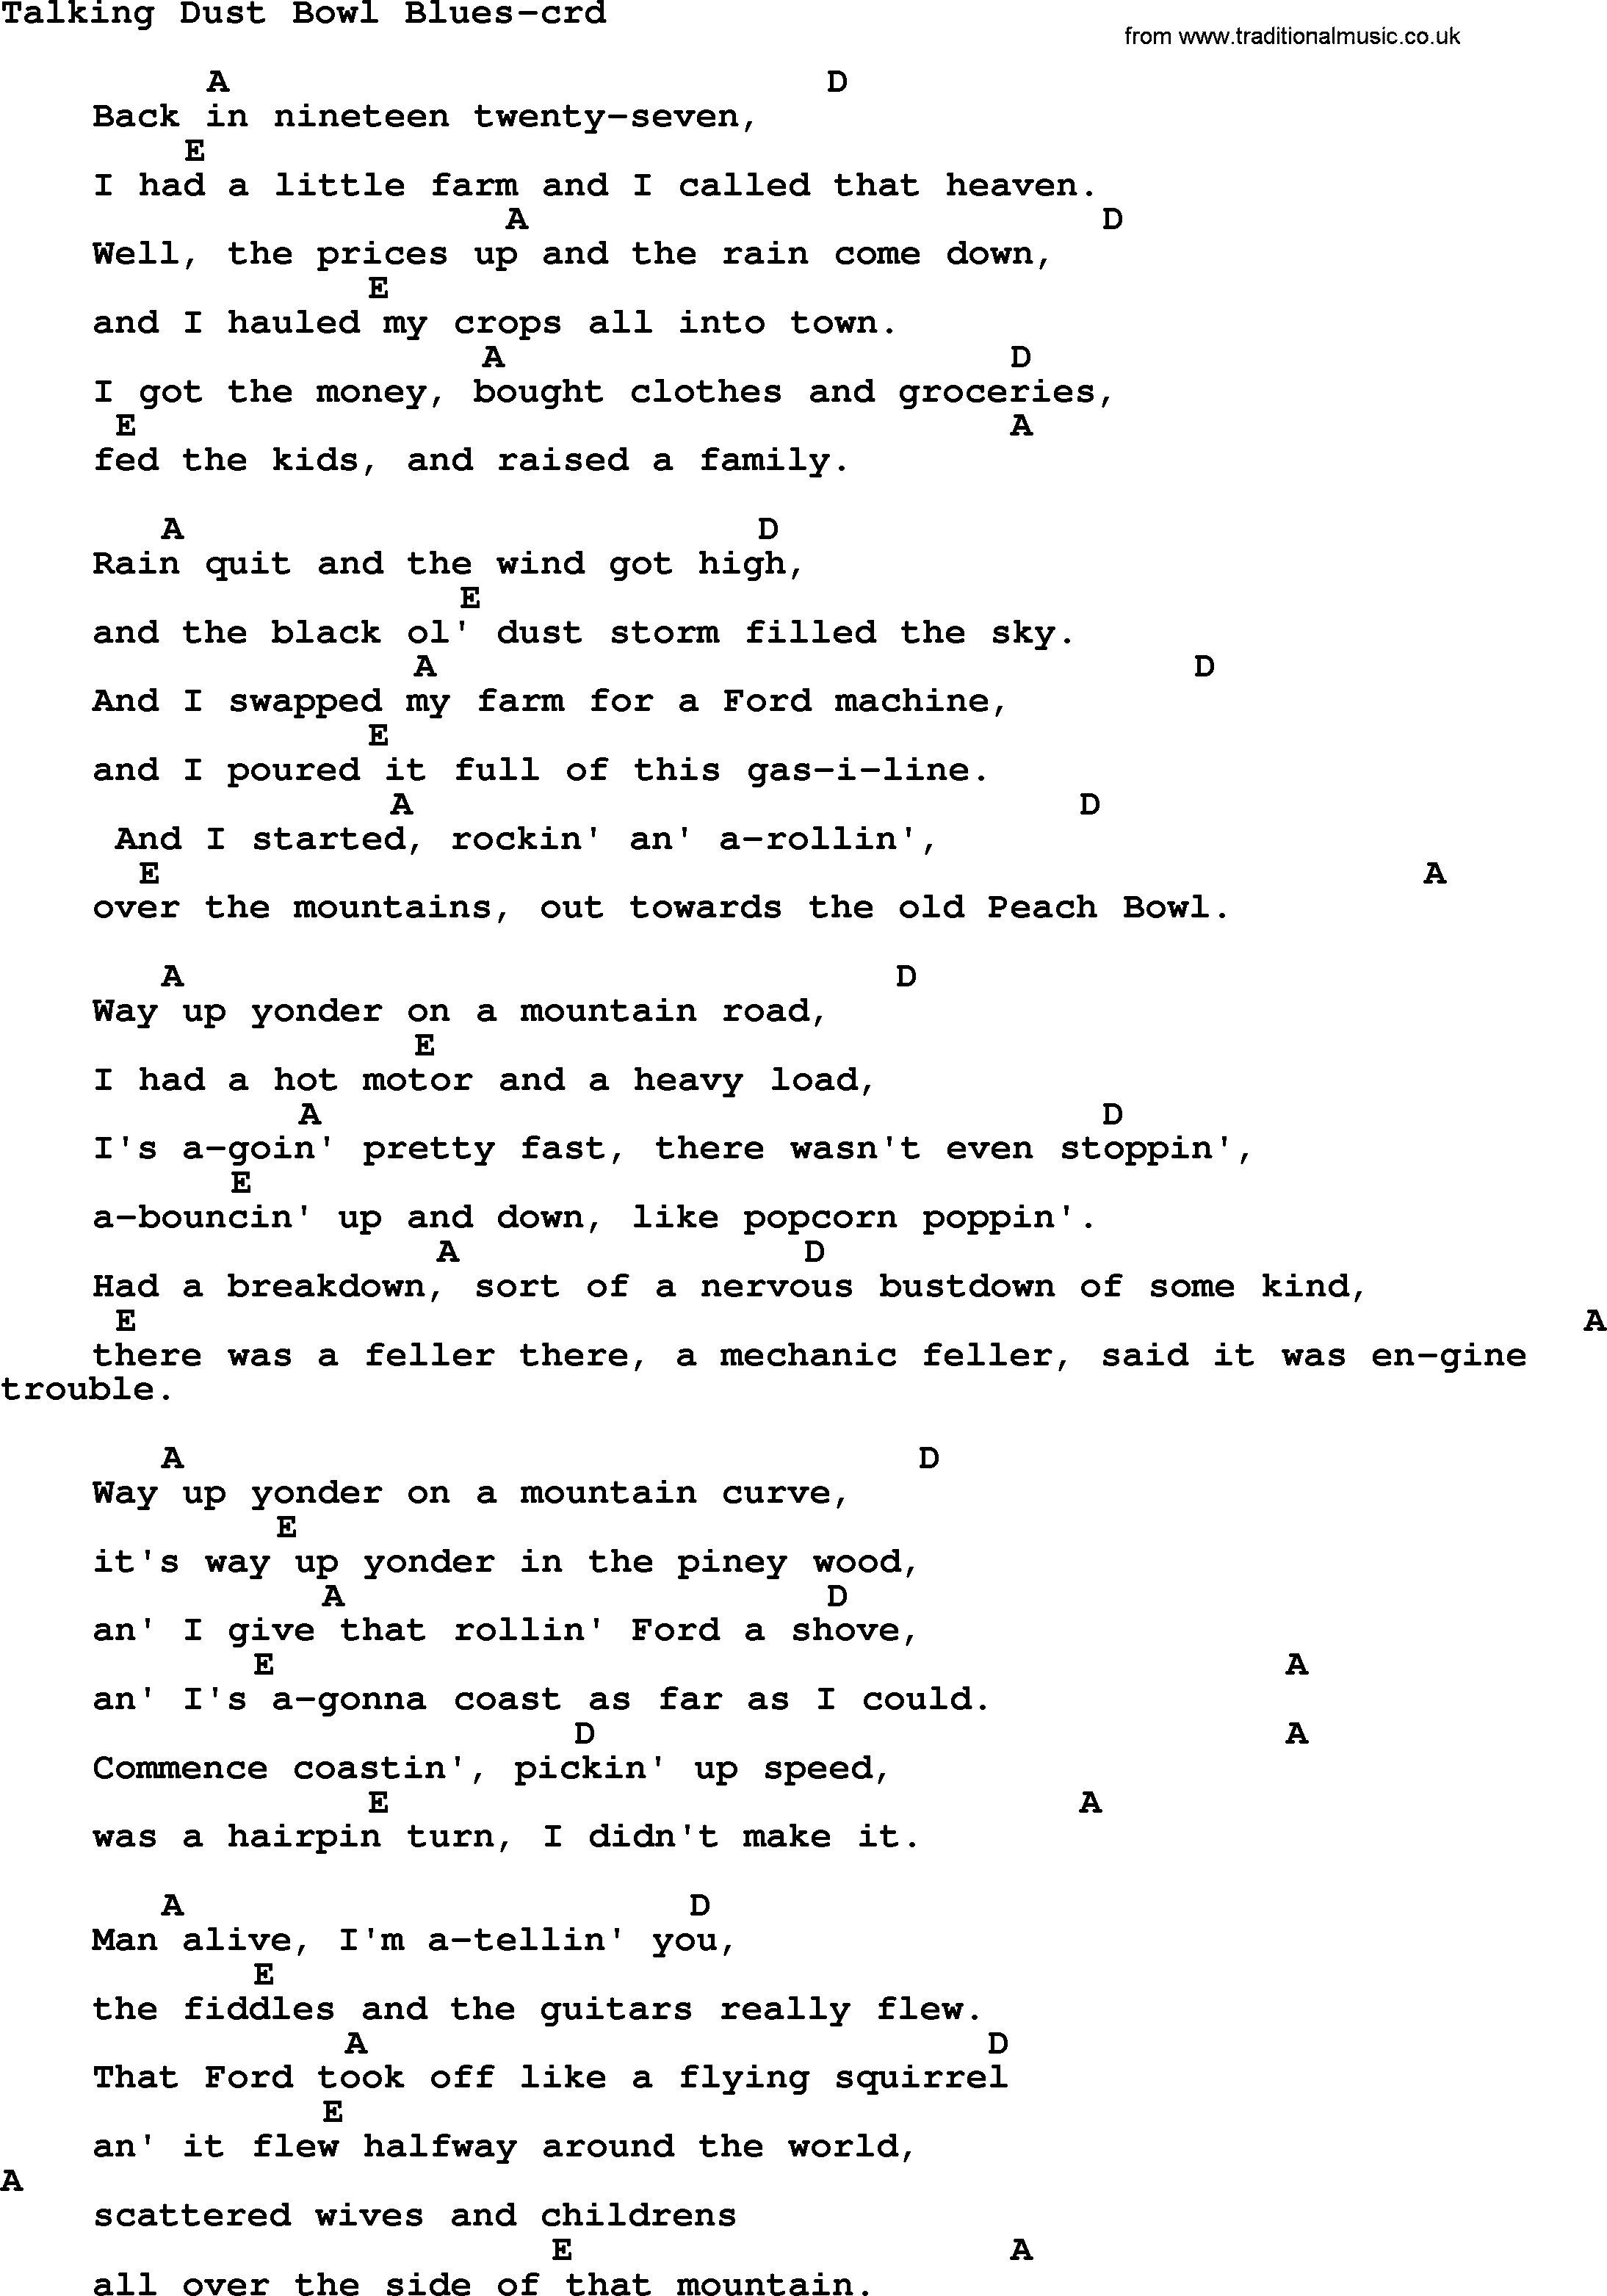 Woody Guthrie song Talking Dust Bowl Blues lyrics and chords